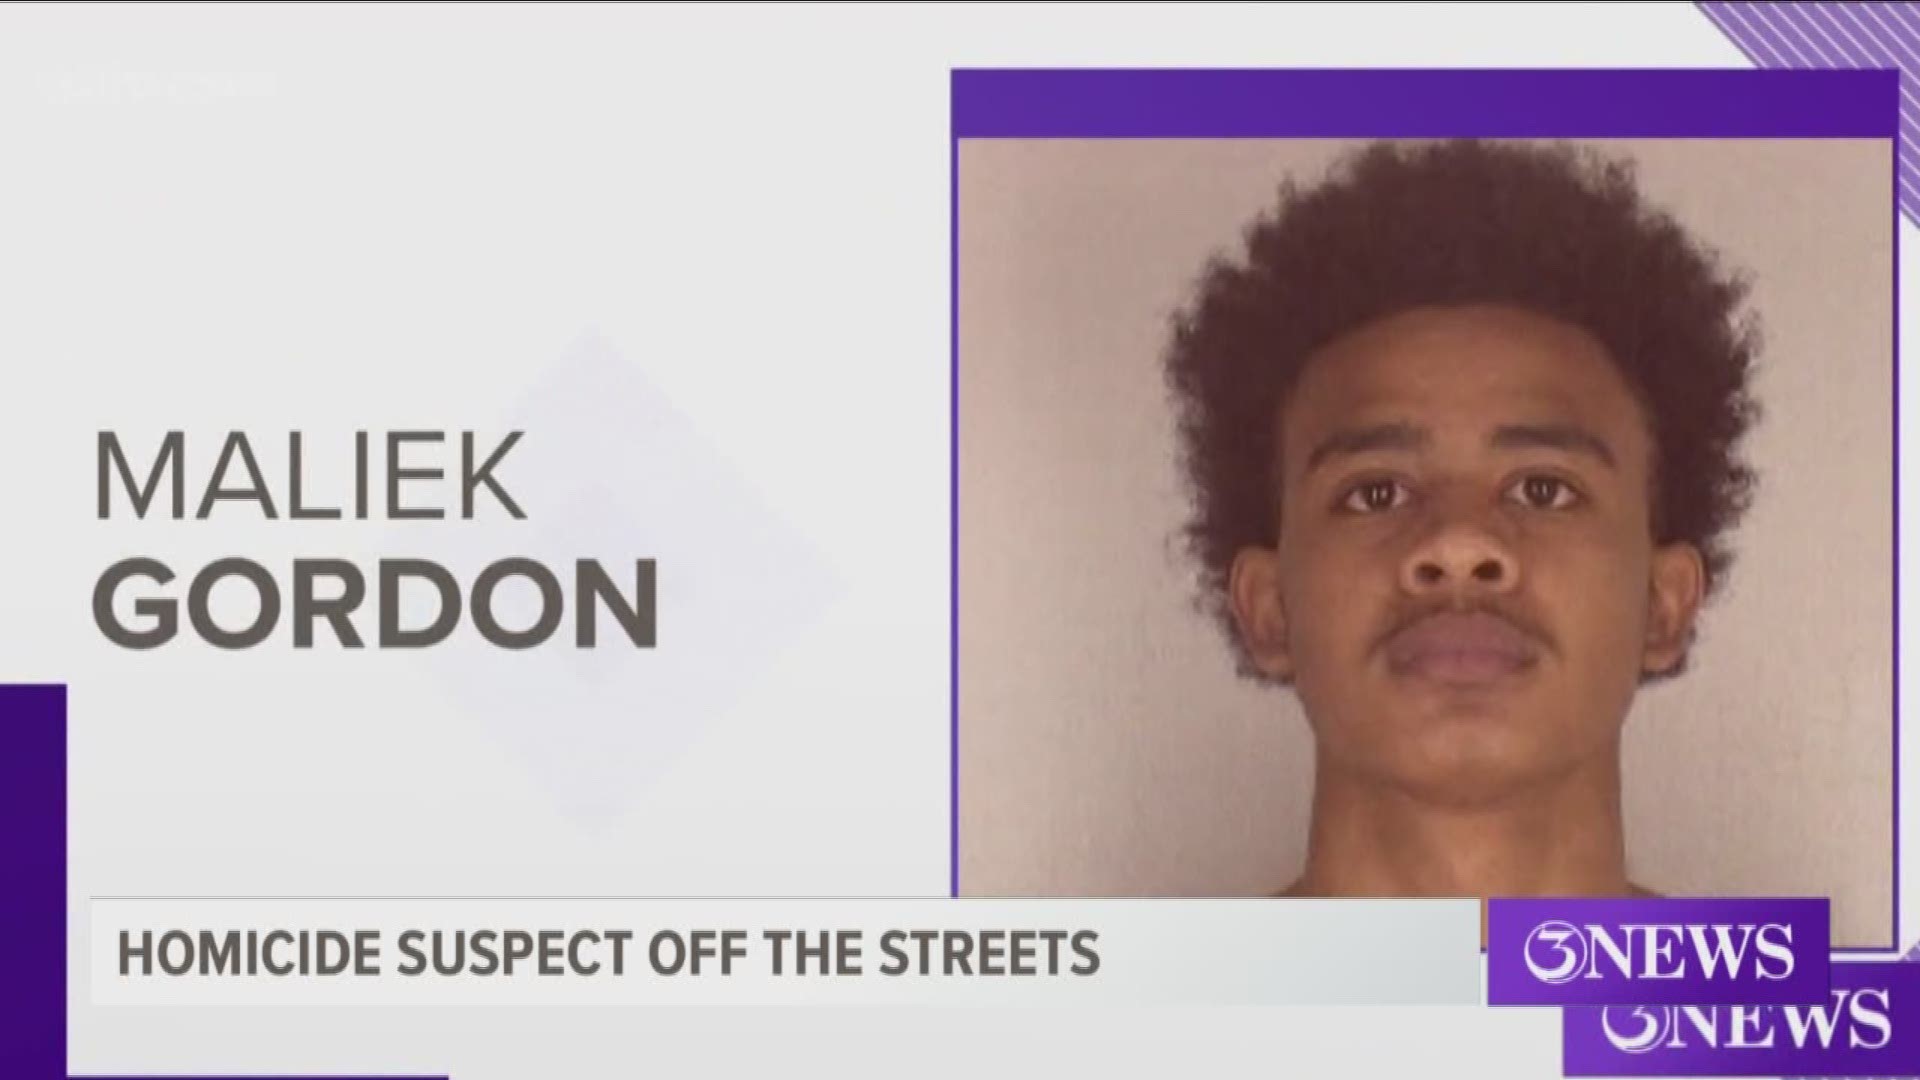 20-year-old Maliek Gordon was located at a residence in the 2700 block of S. Port Avenue.